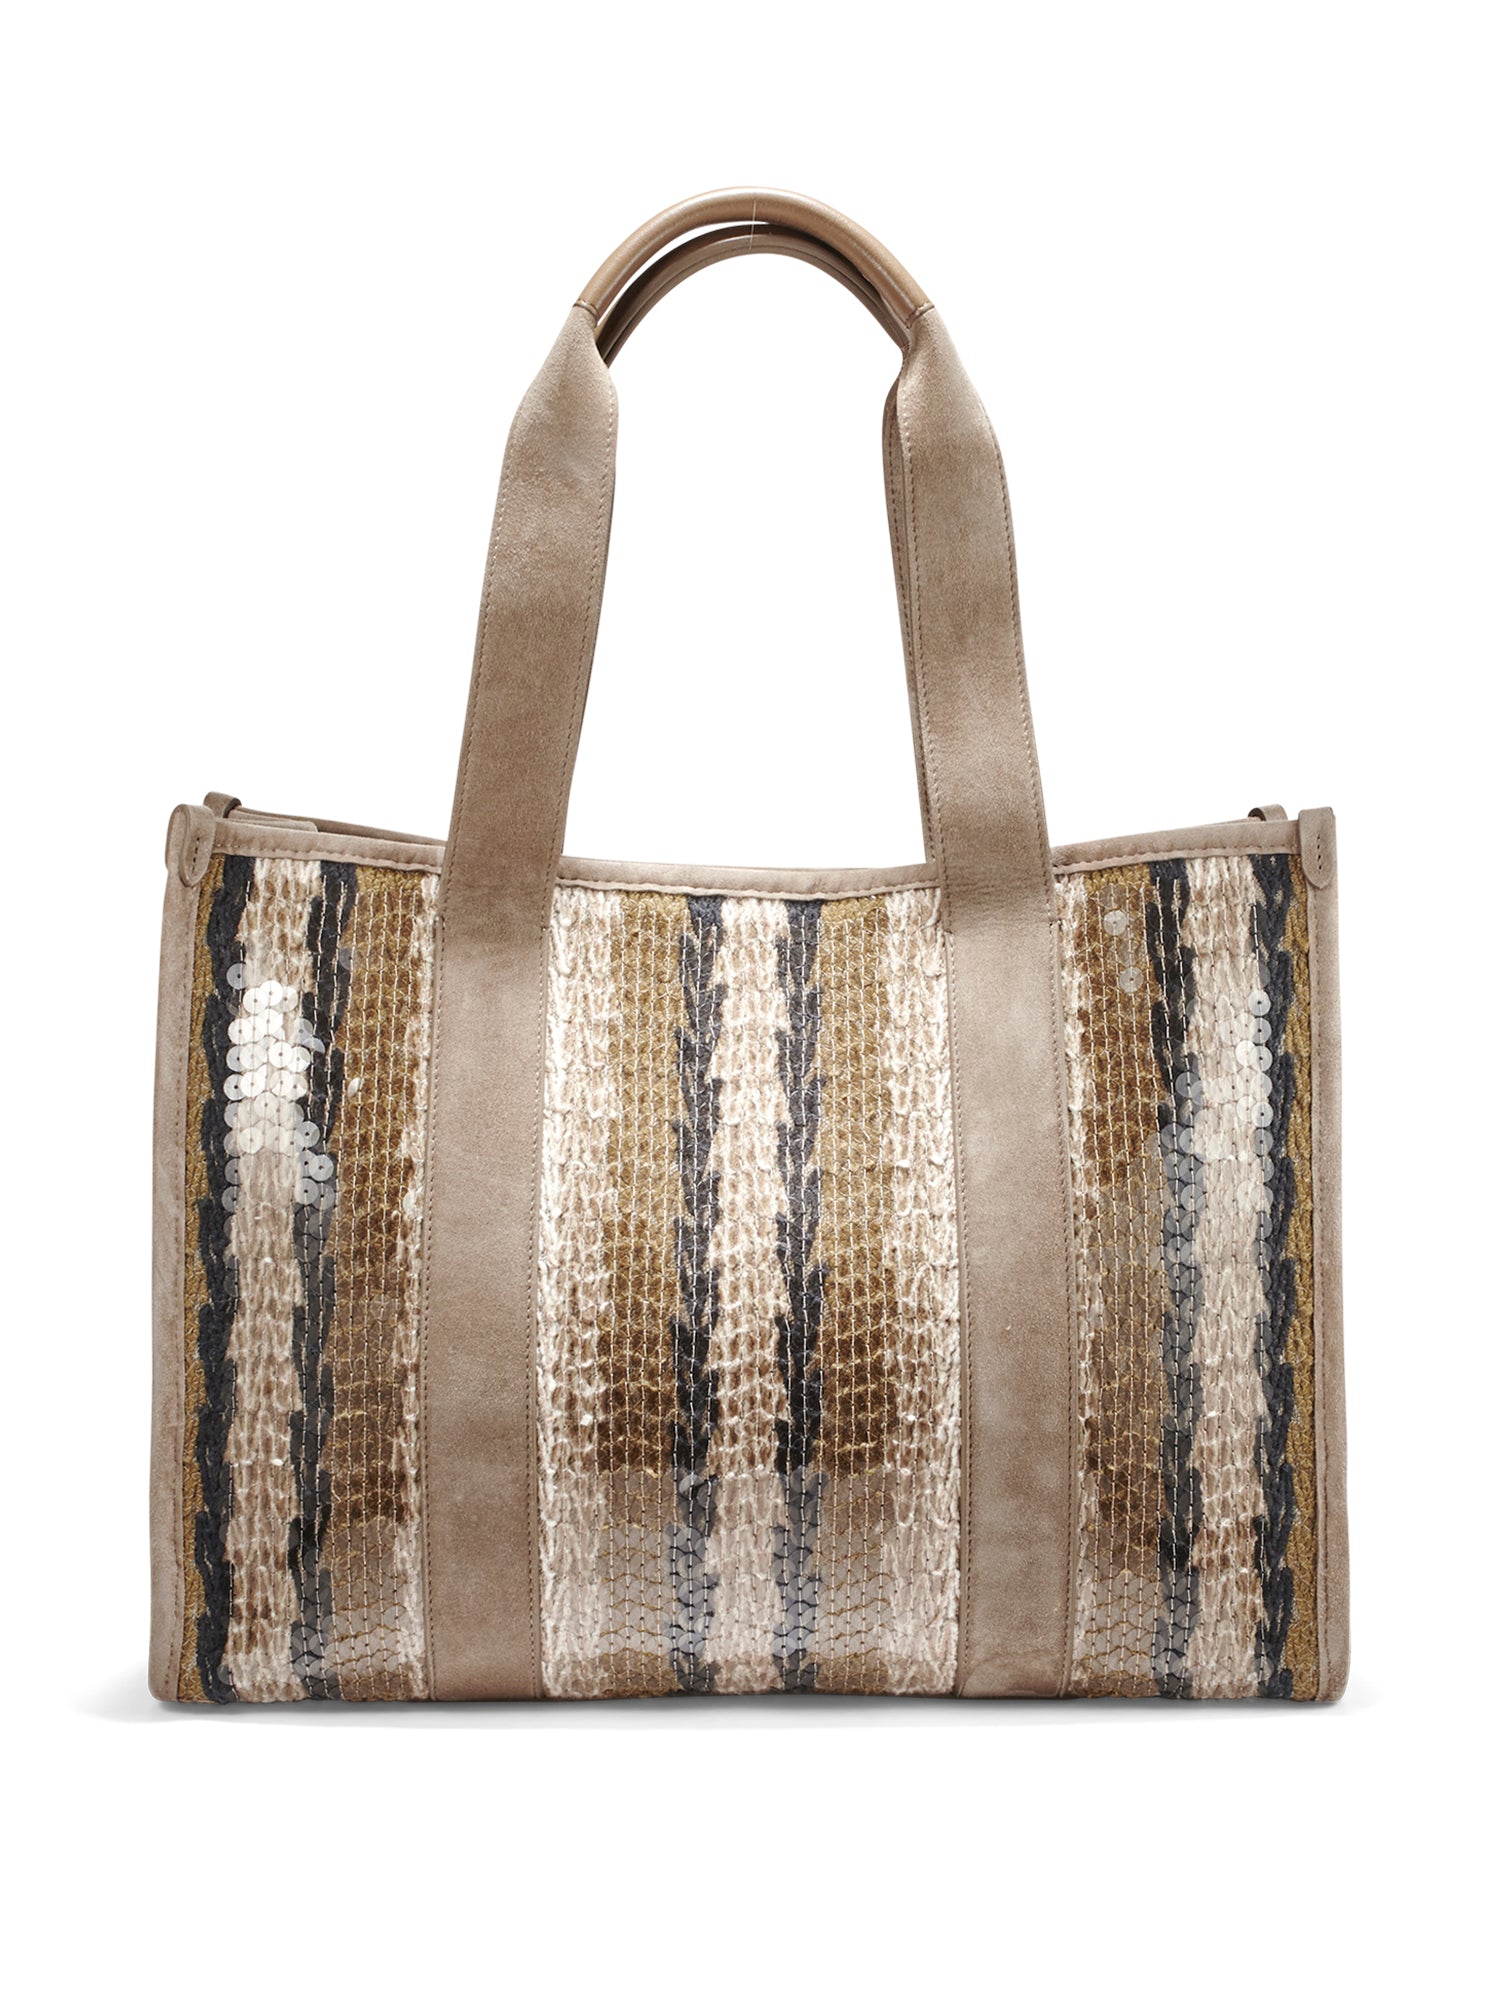 Paillette and Suede Canvas Tote